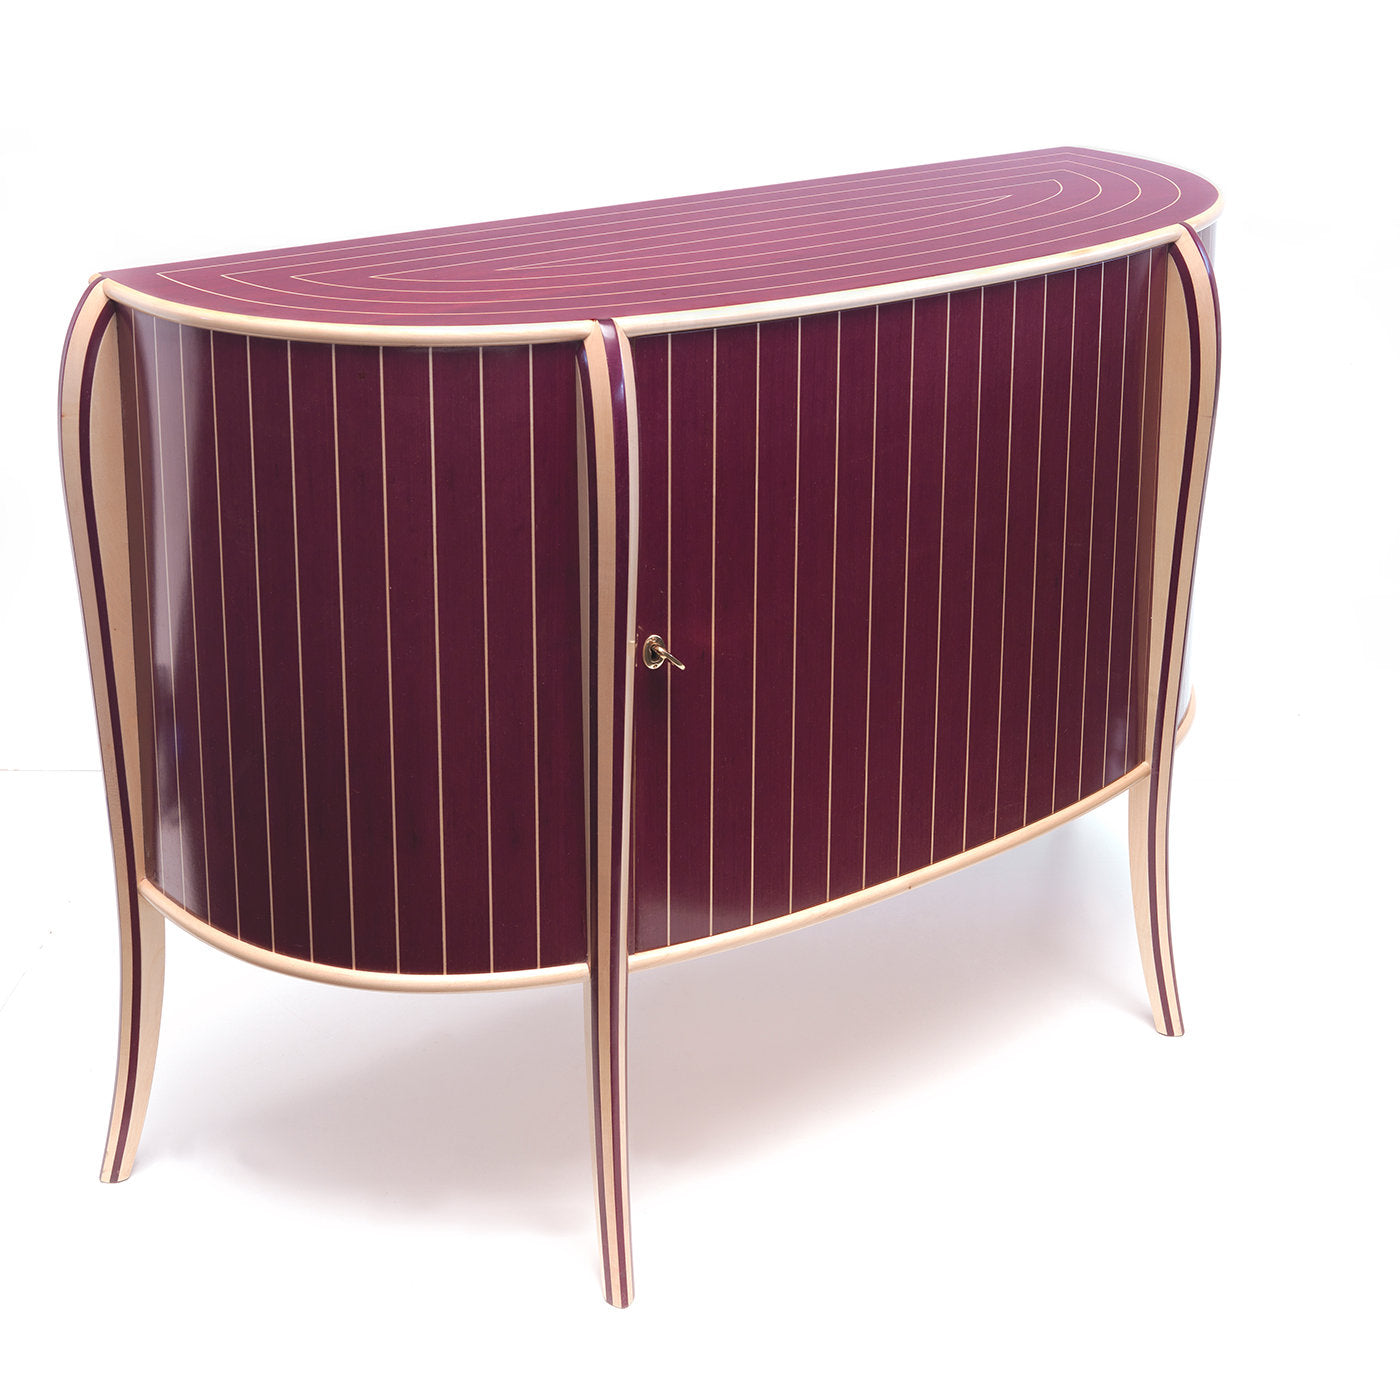 Maple and Purpleheart Marquetry Sideboard - Alternative view 1